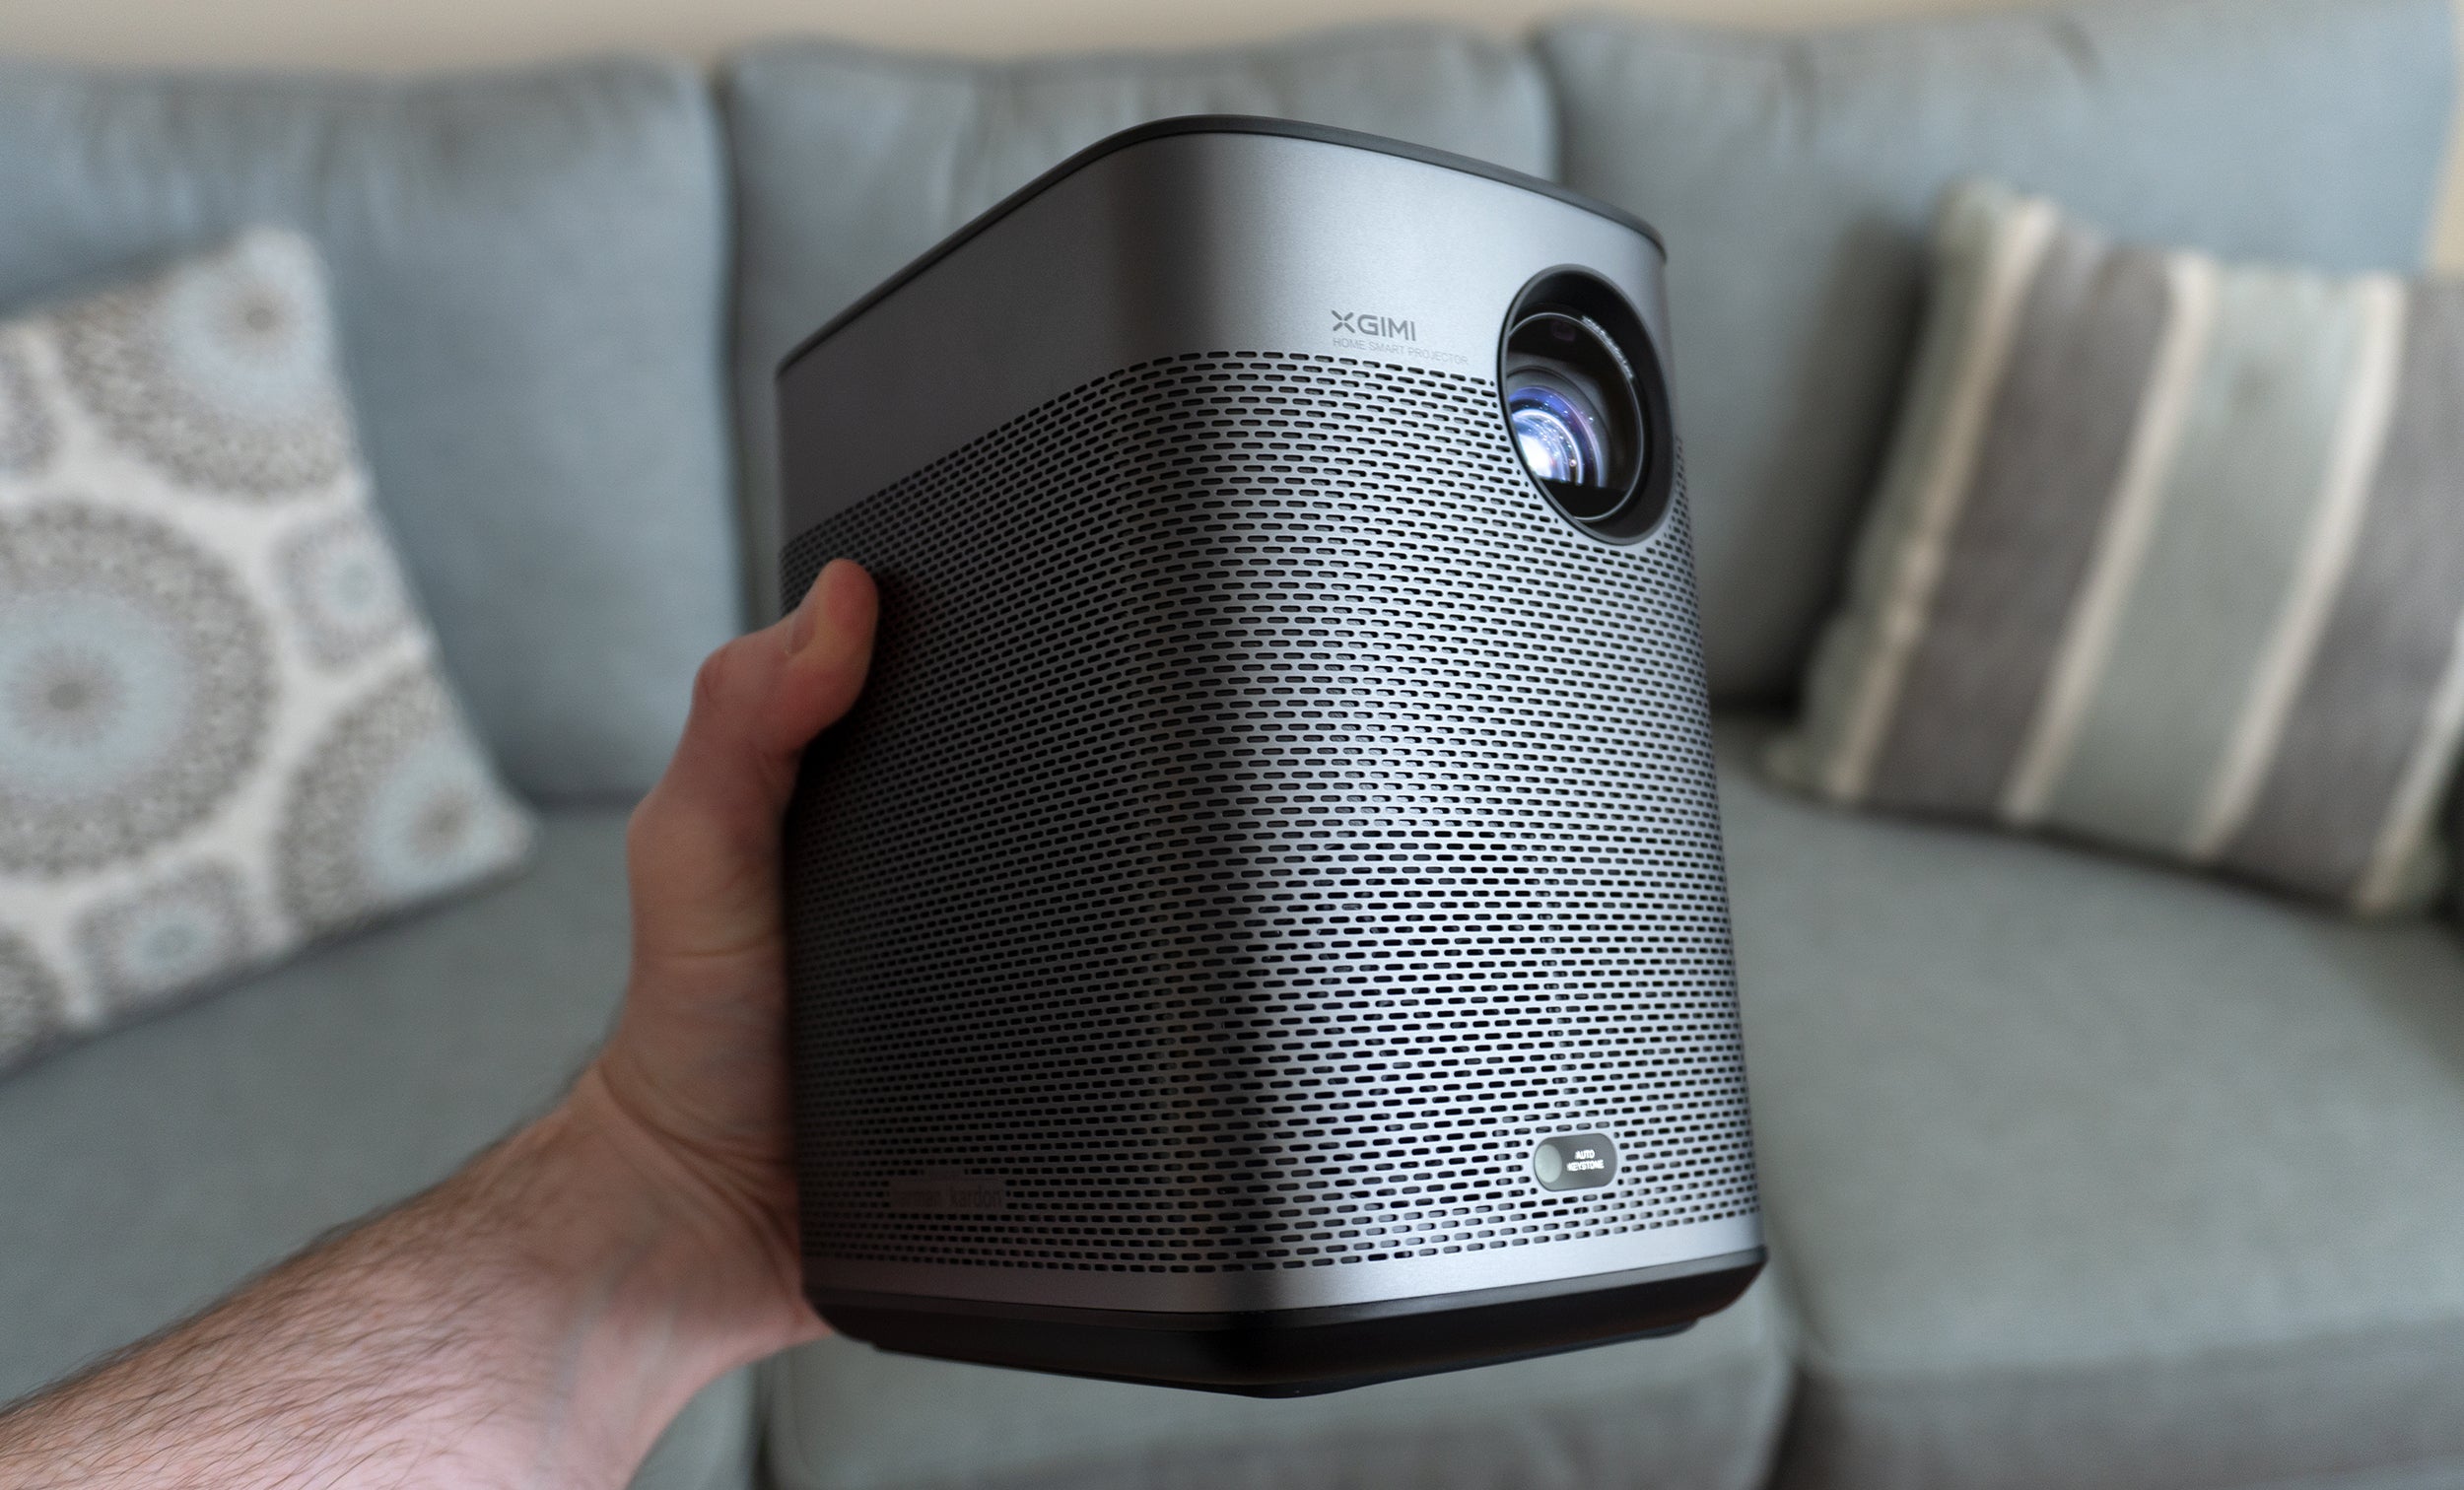 You can easily carry the XGIMI Halo+ in a bag, but weighing in at 2 kg you're going to feel the projector in there. (Photo: Andrew Liszewski | Gizmodo)